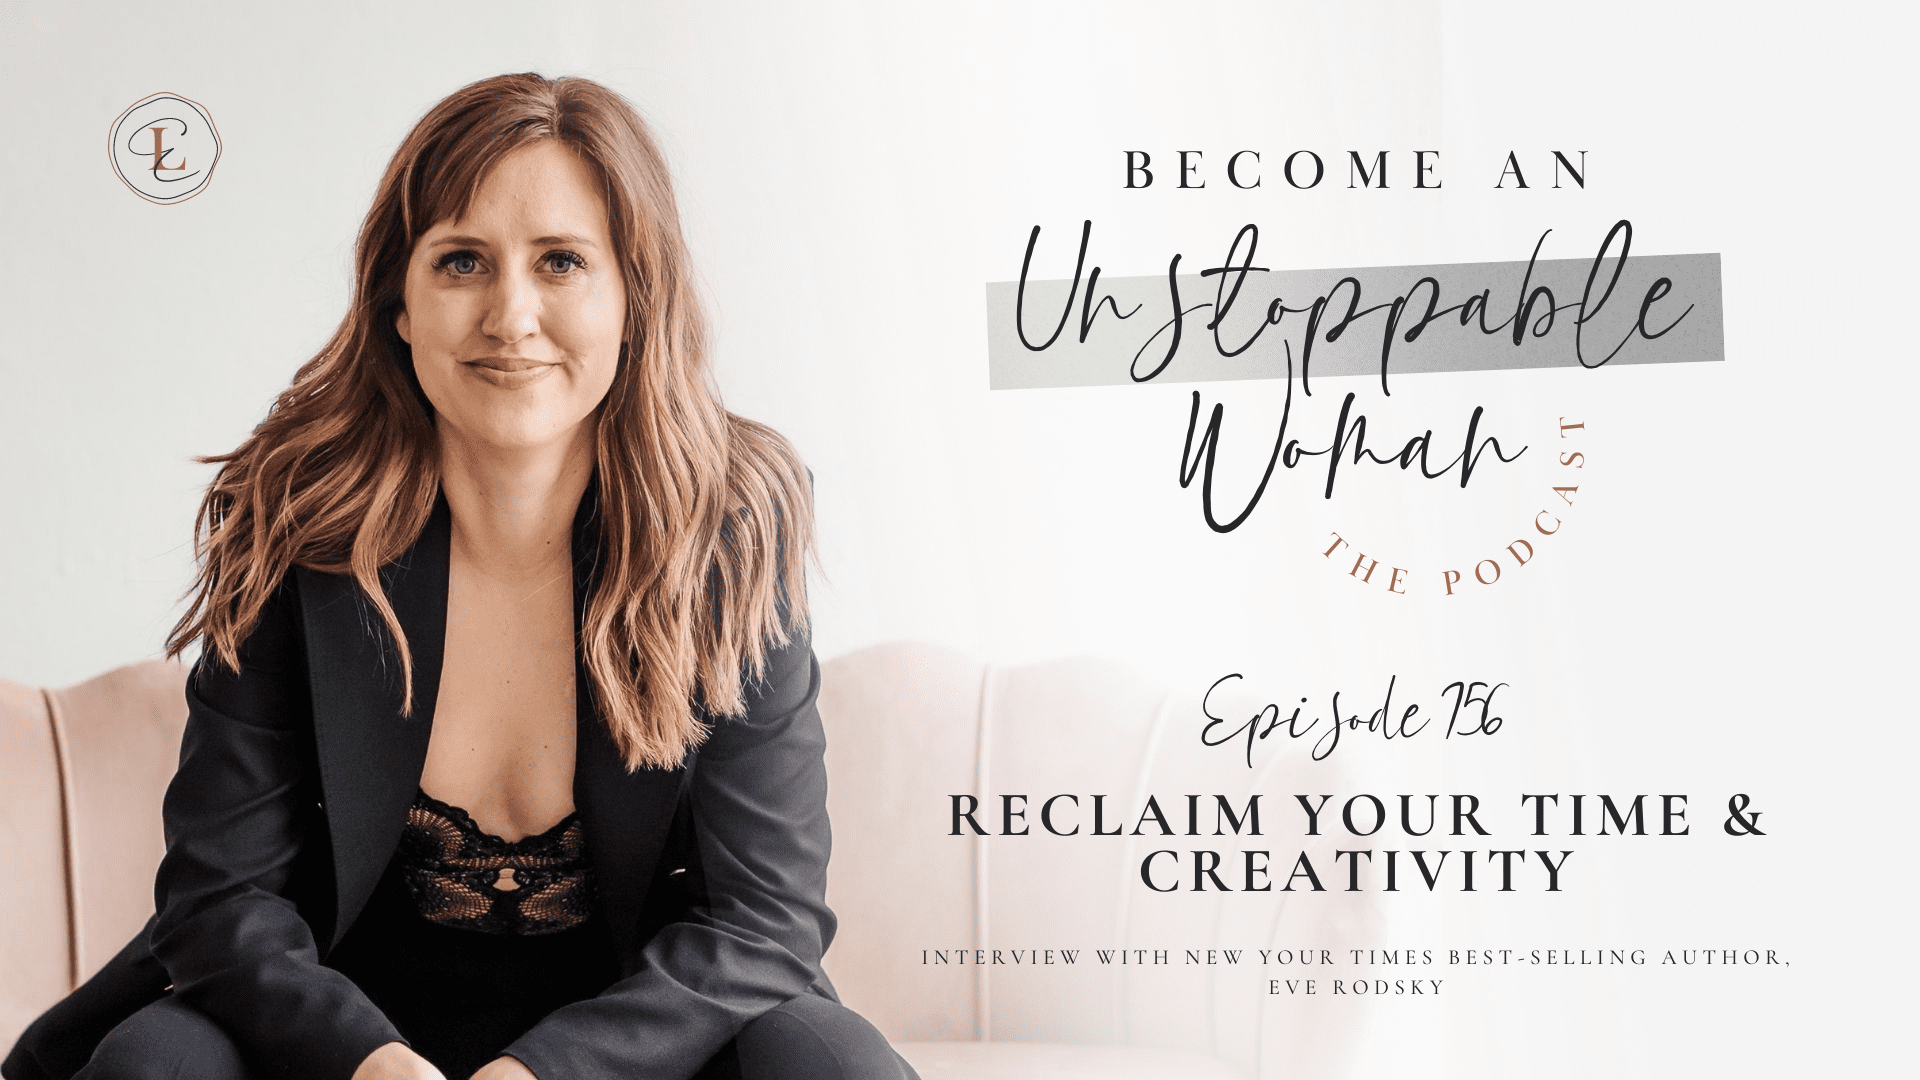 RECLAIM YOUR TIME & CREATIVITY w/ Eve Rodsky, New York Times Best-selling Author